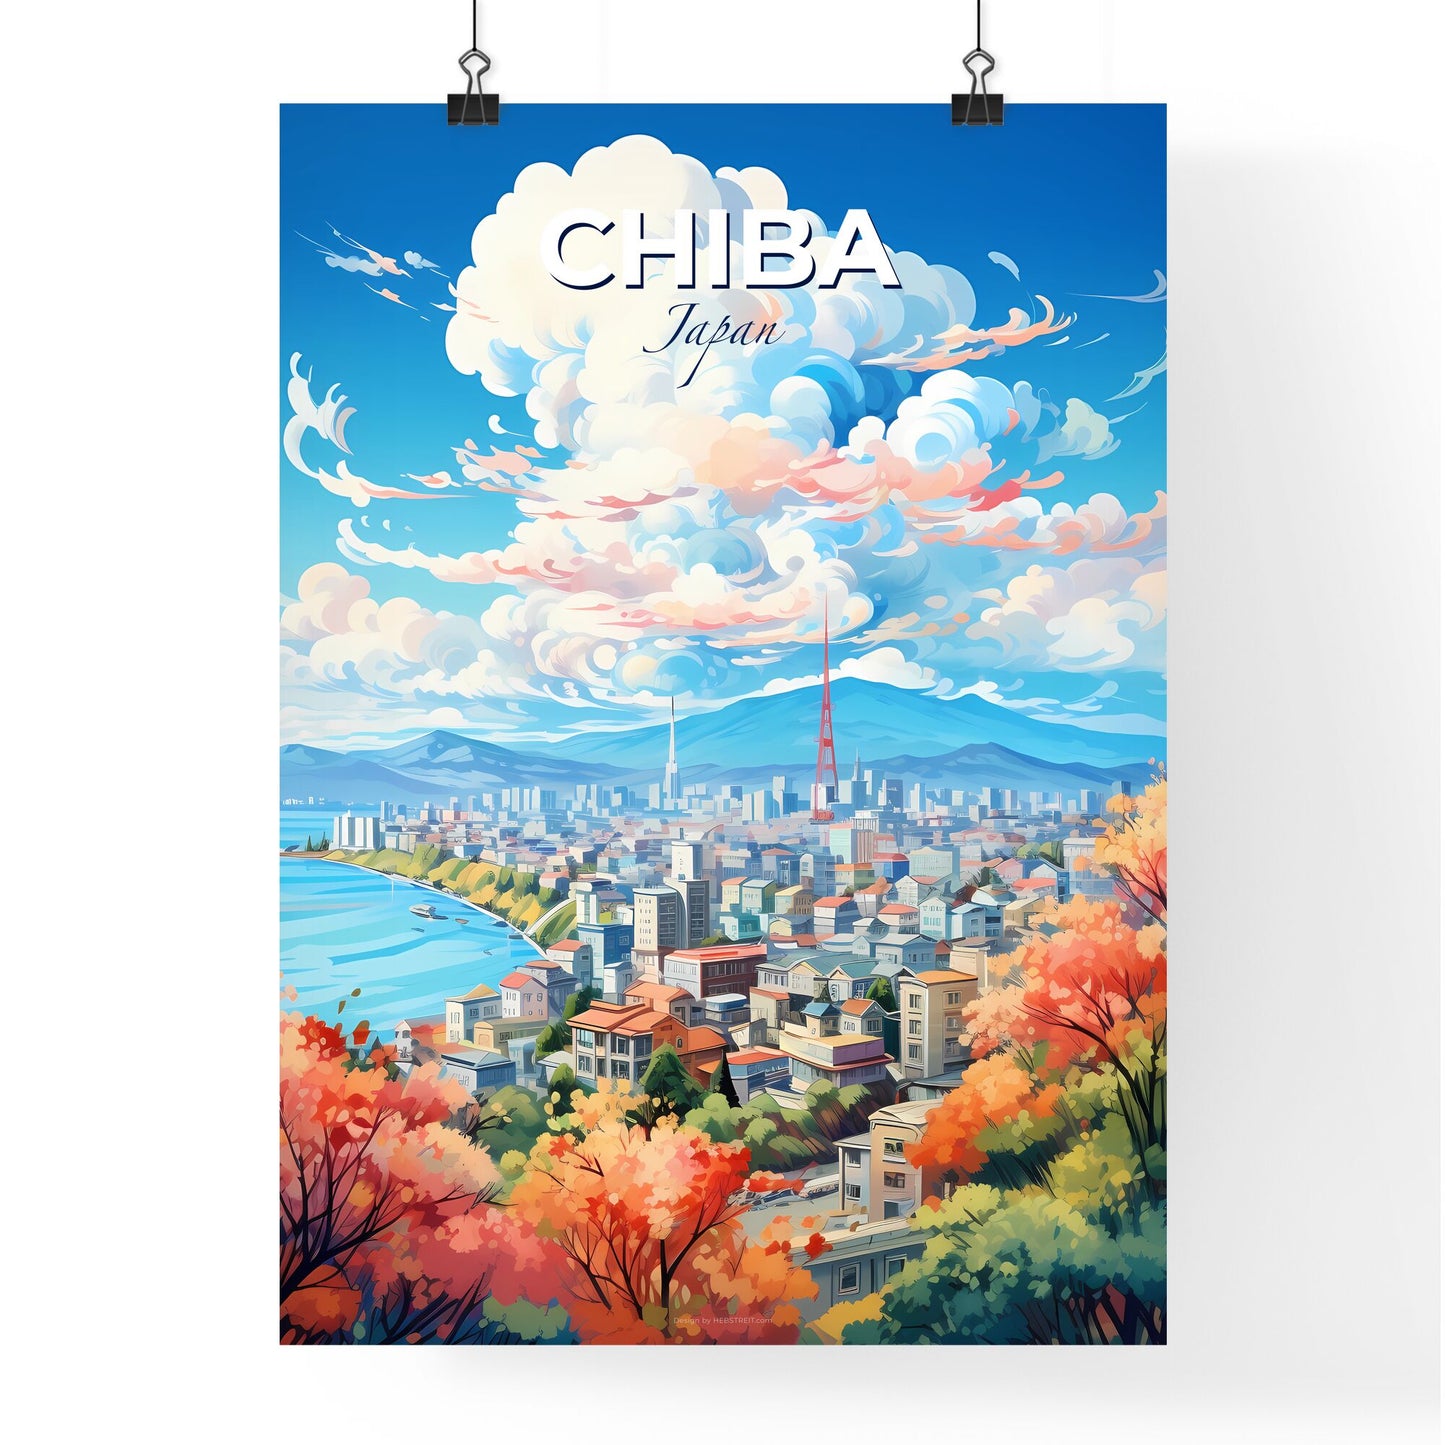 Chiba Japan Skyline - A City By The Water - Customizable Travel Gift Default Title